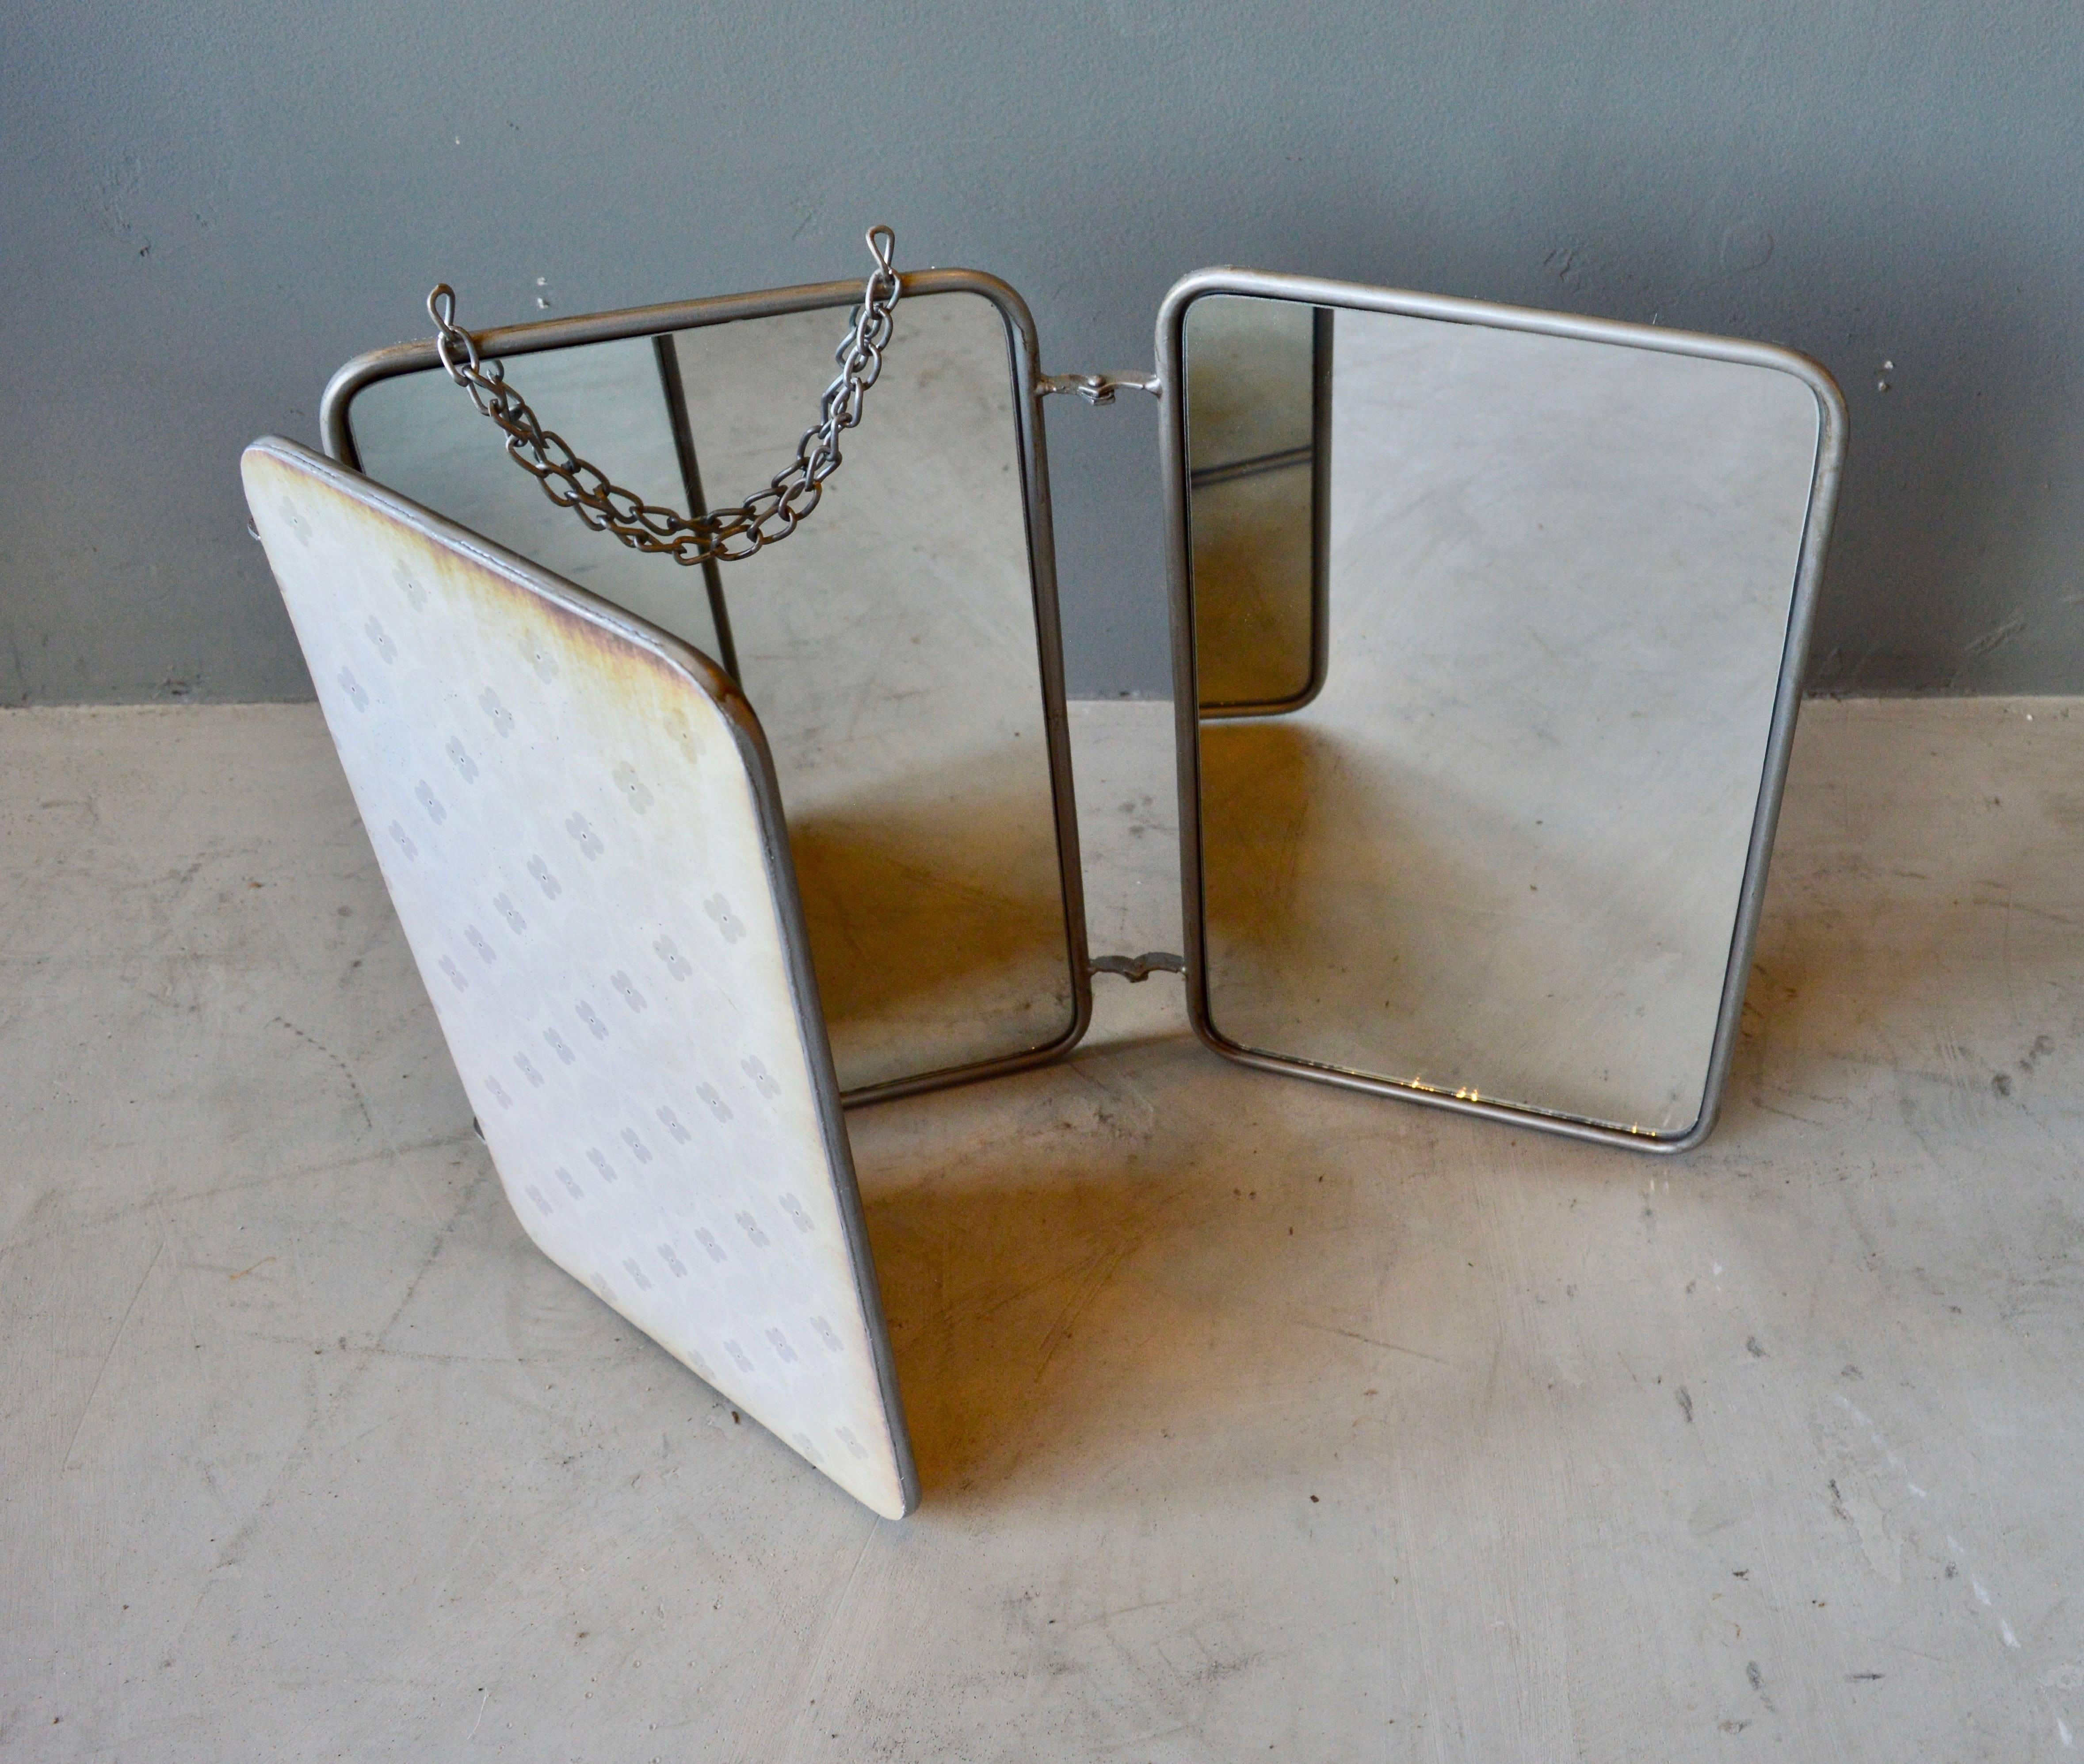 Interesting French triptych barber's mirror. Chrome and glass in good condition. Suspended from a chain. Opens and closes. Unique piece and great bathroom mirror or wall art.